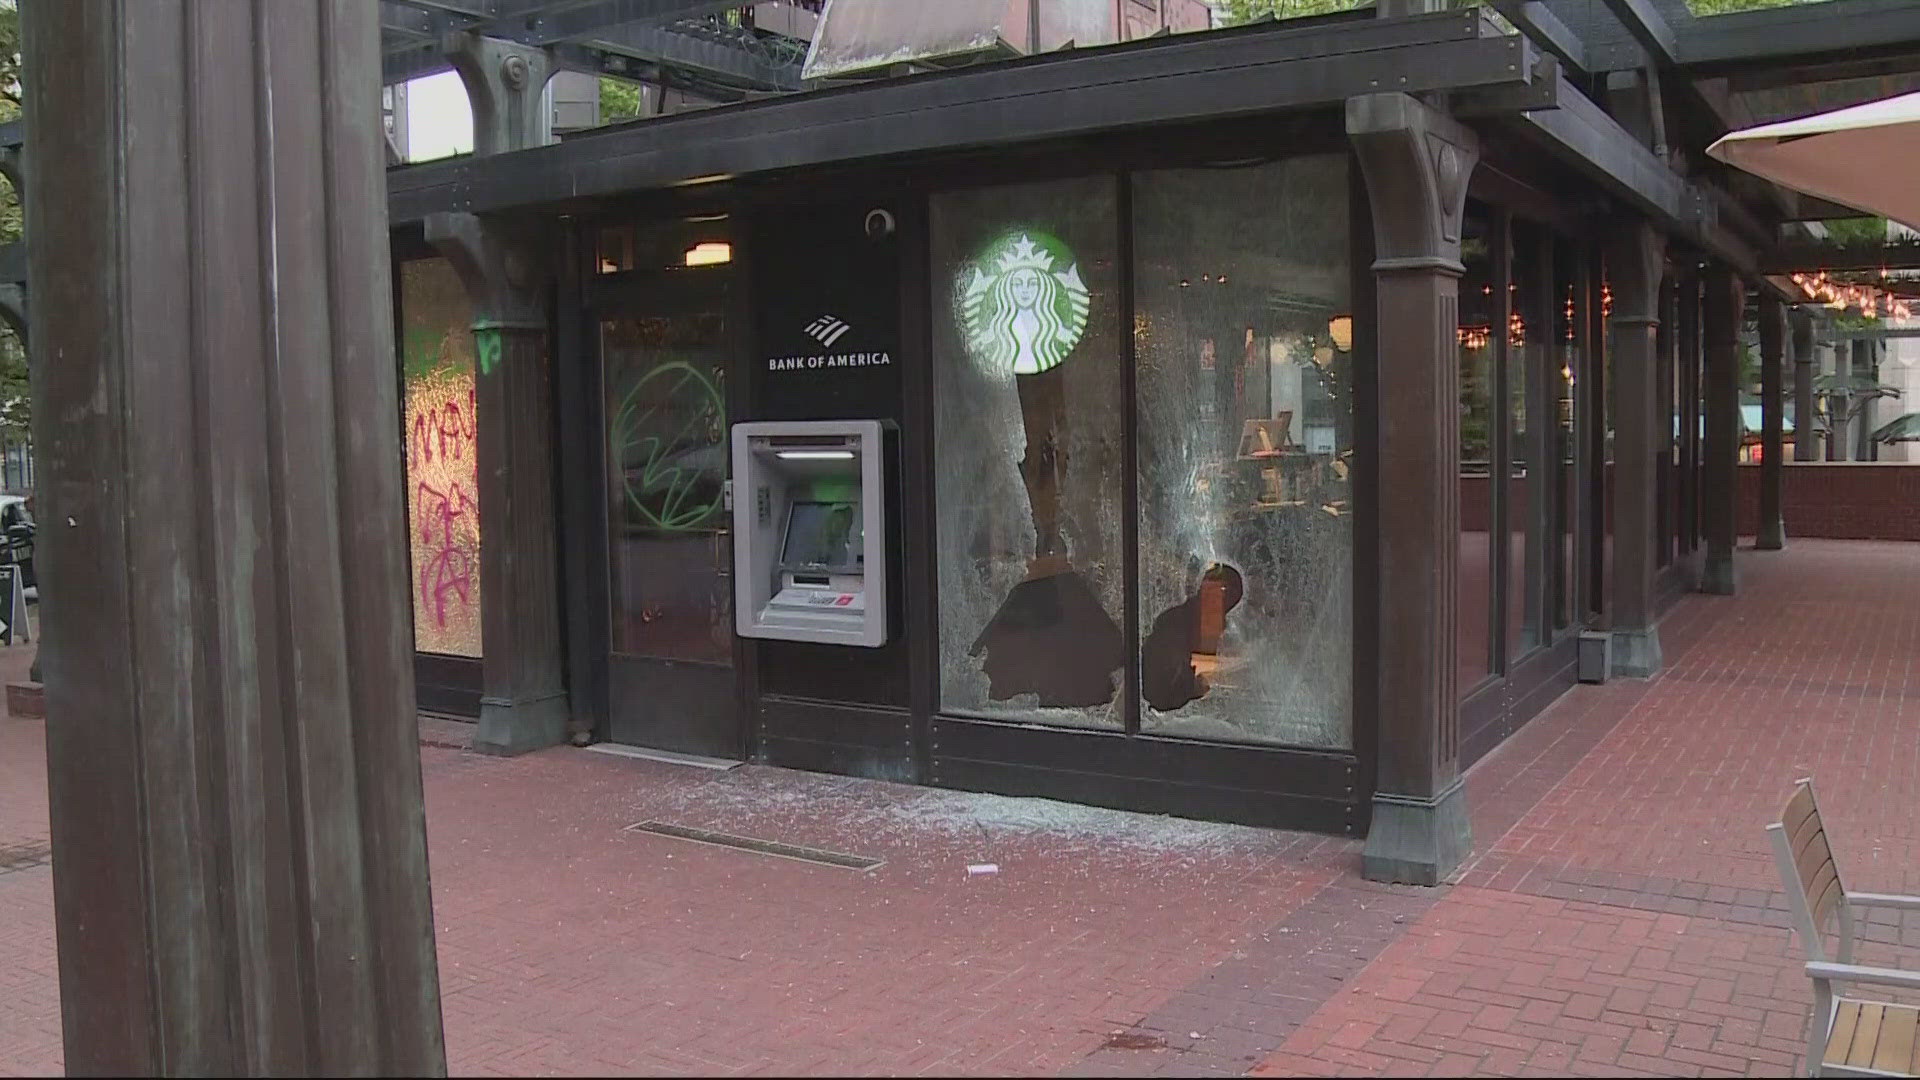 PSU also warned of police activity at the South Park blocks, asking people to avoid the area. Commercial-grade fire works were deployed causing damage to businesses.